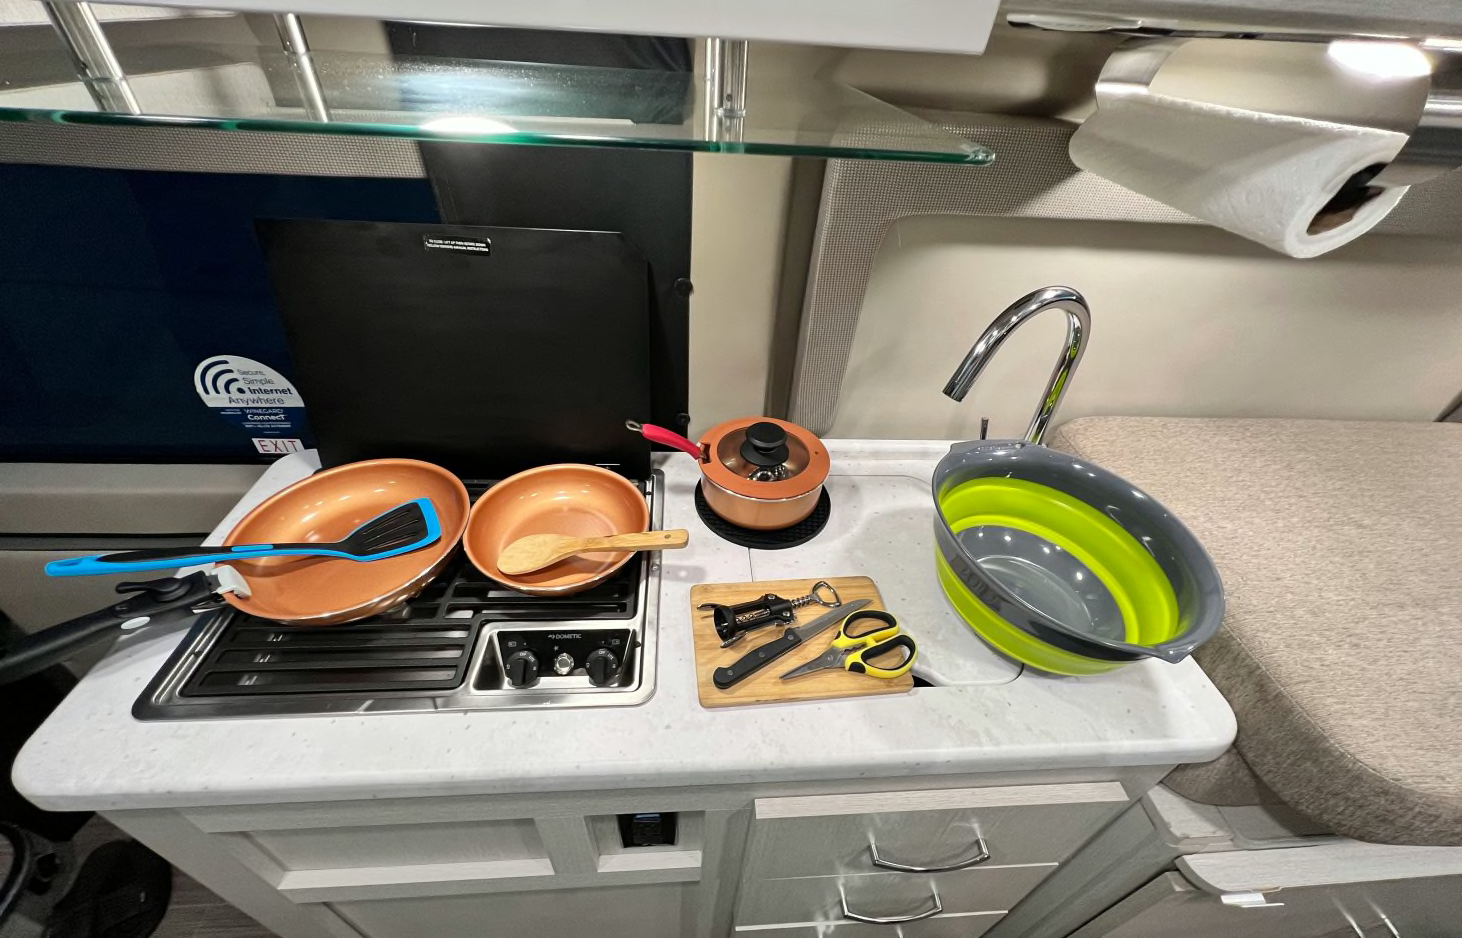 Trying Your Recipes In Our #Roydx RV Cookware 🍳 #rv